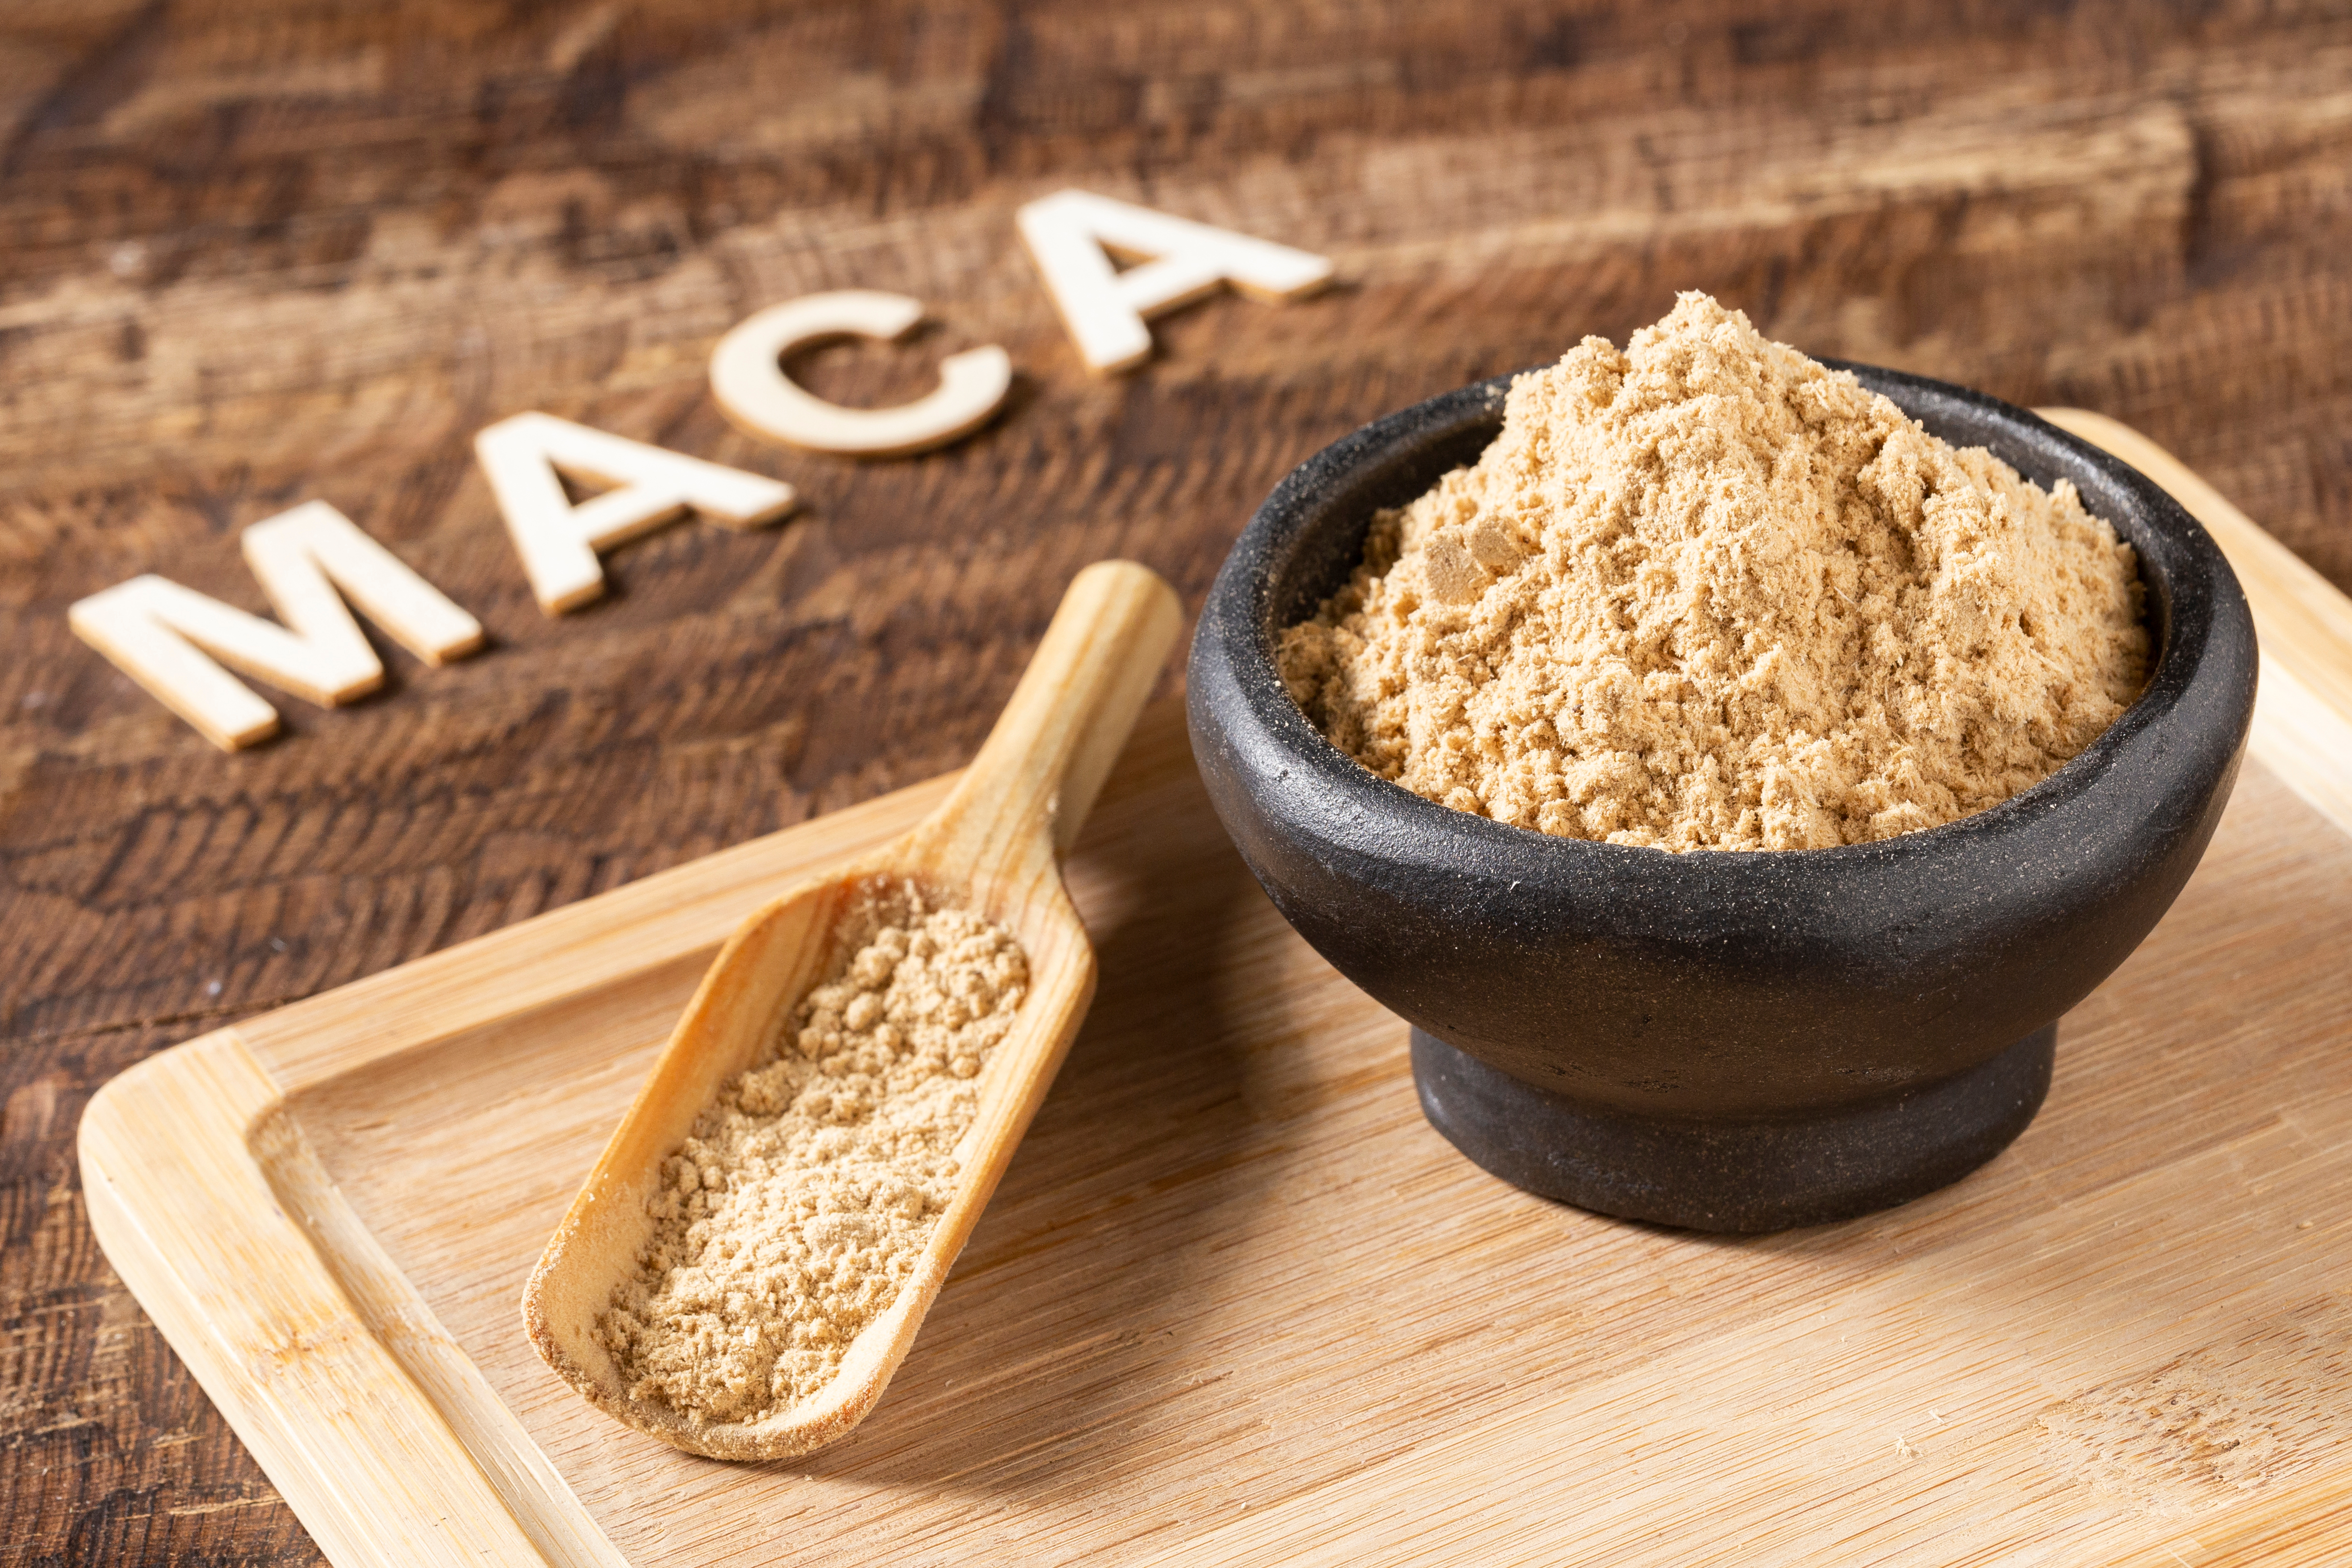 Maca: An alternative for Escort Girls to remain sexually stimulated?